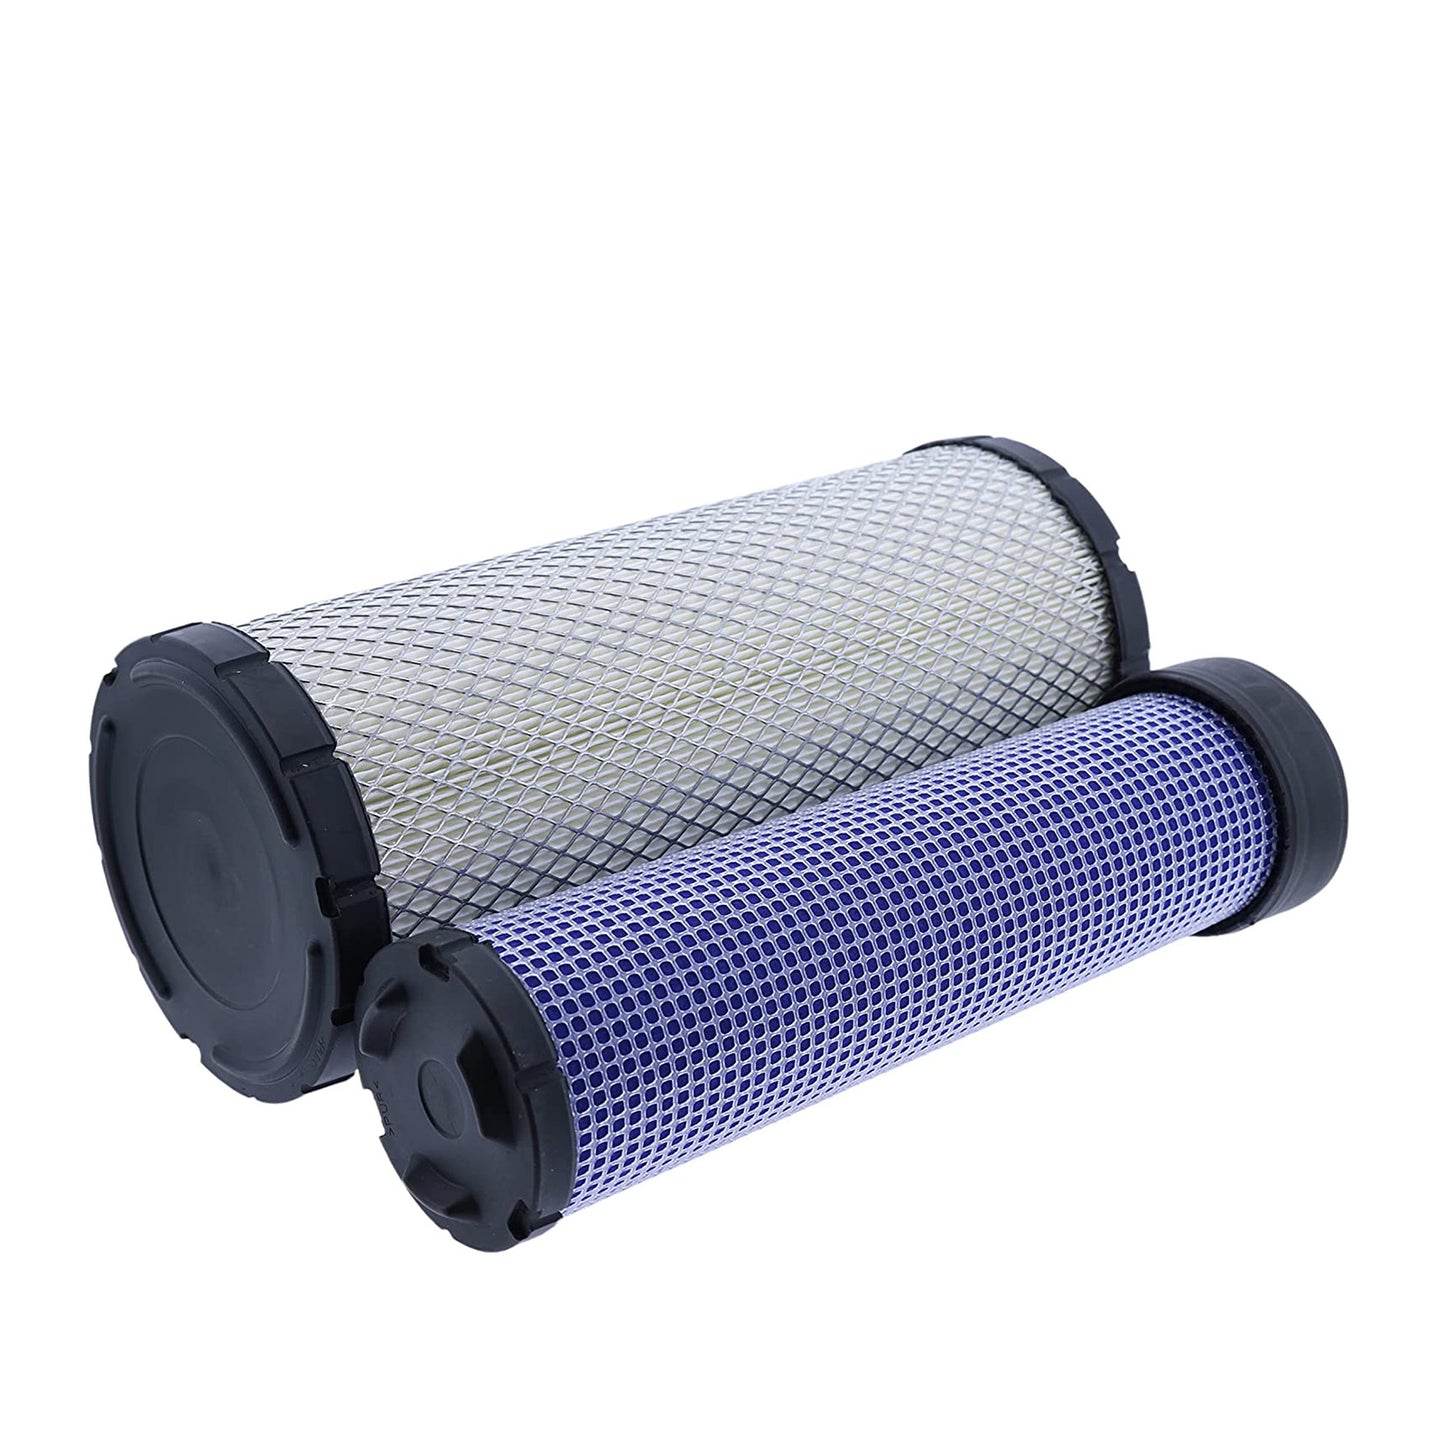 6666333 6666334 Inner & Outer Air Filter Kit Compatible with Caterpillar 134-8726 140-2334